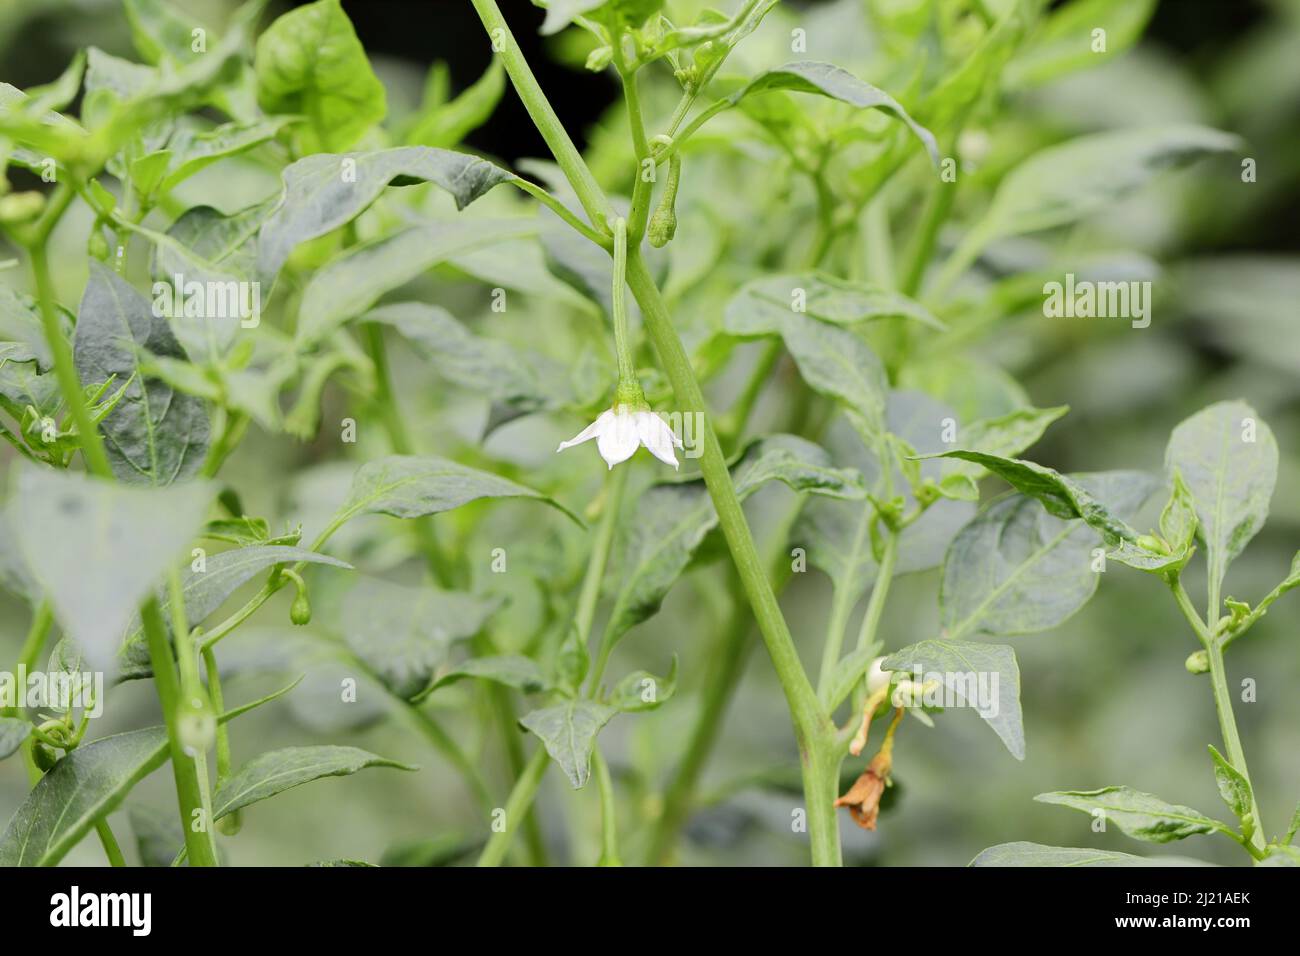 Close-up Photo of White colored flowers blooming on chilli crop Stock Photo